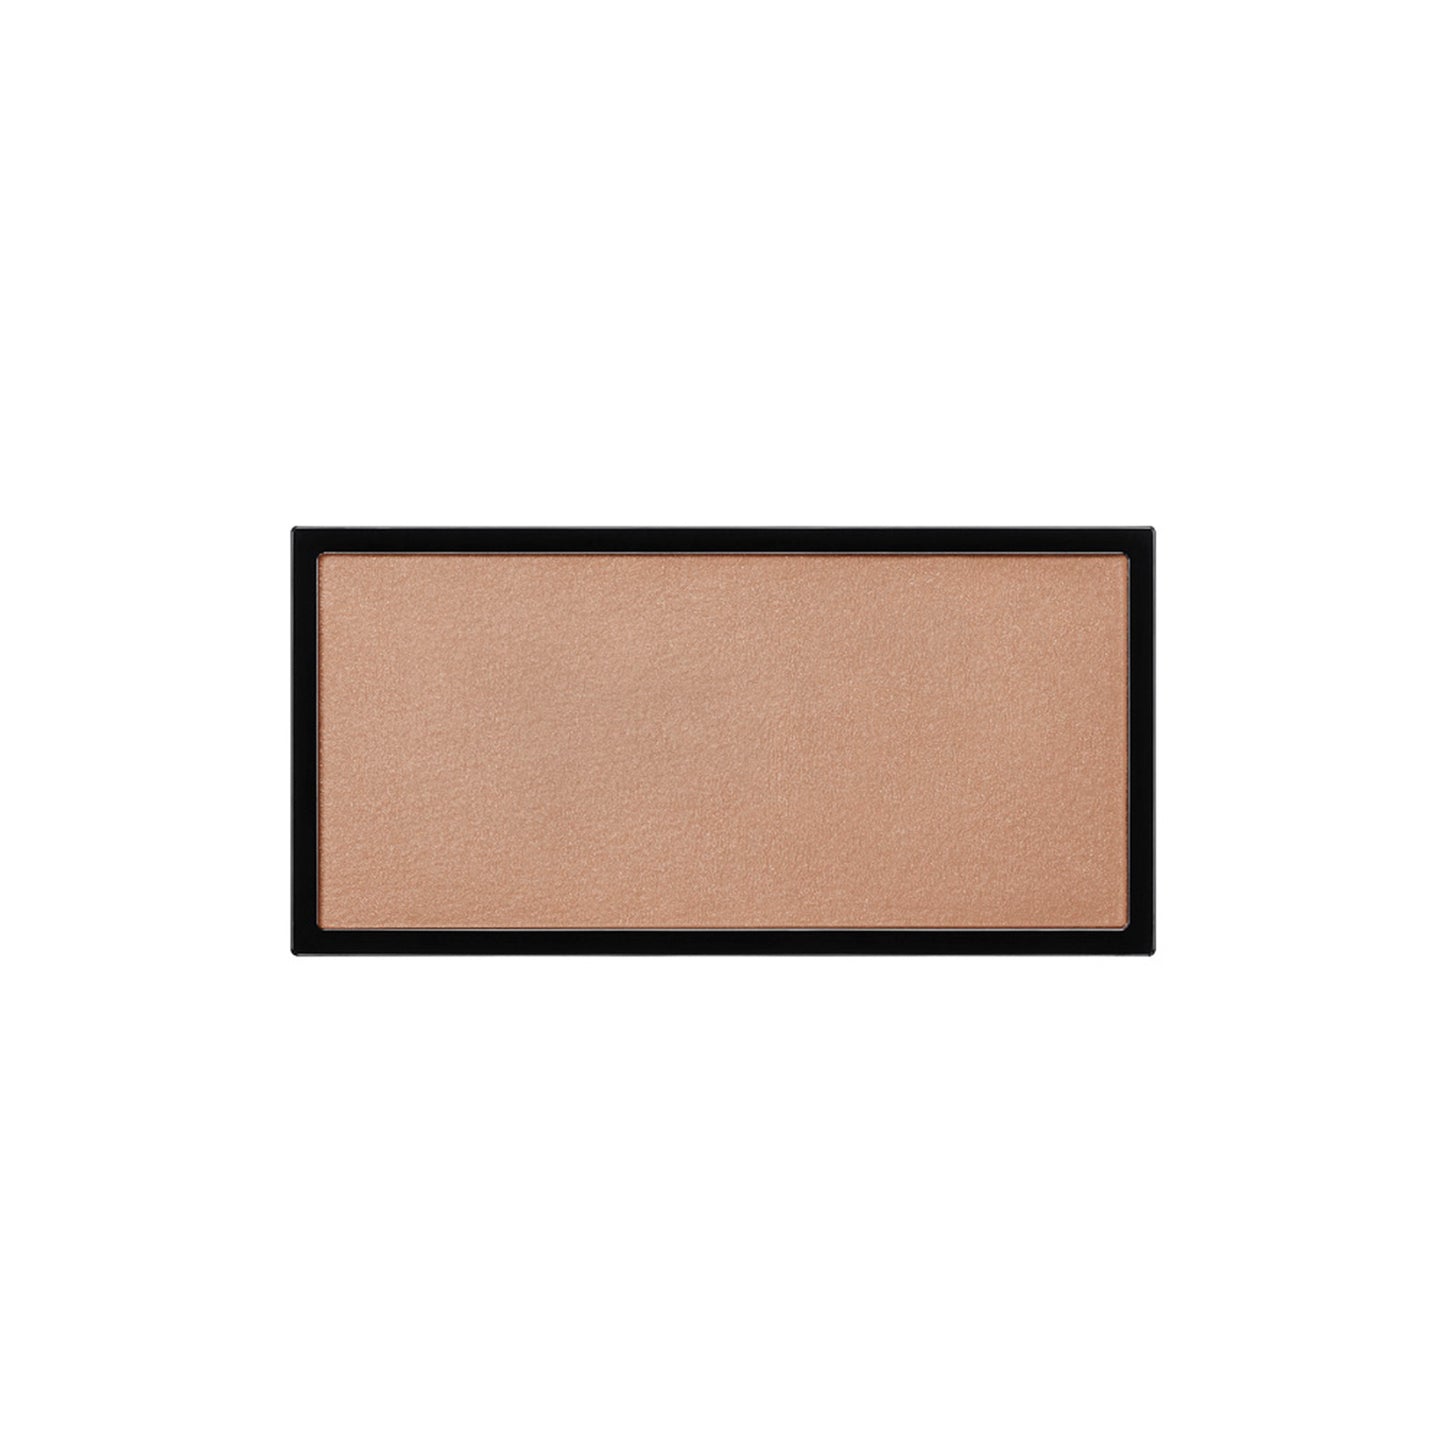 A rectangle shaped powder blush pan in a beige-taupe shade